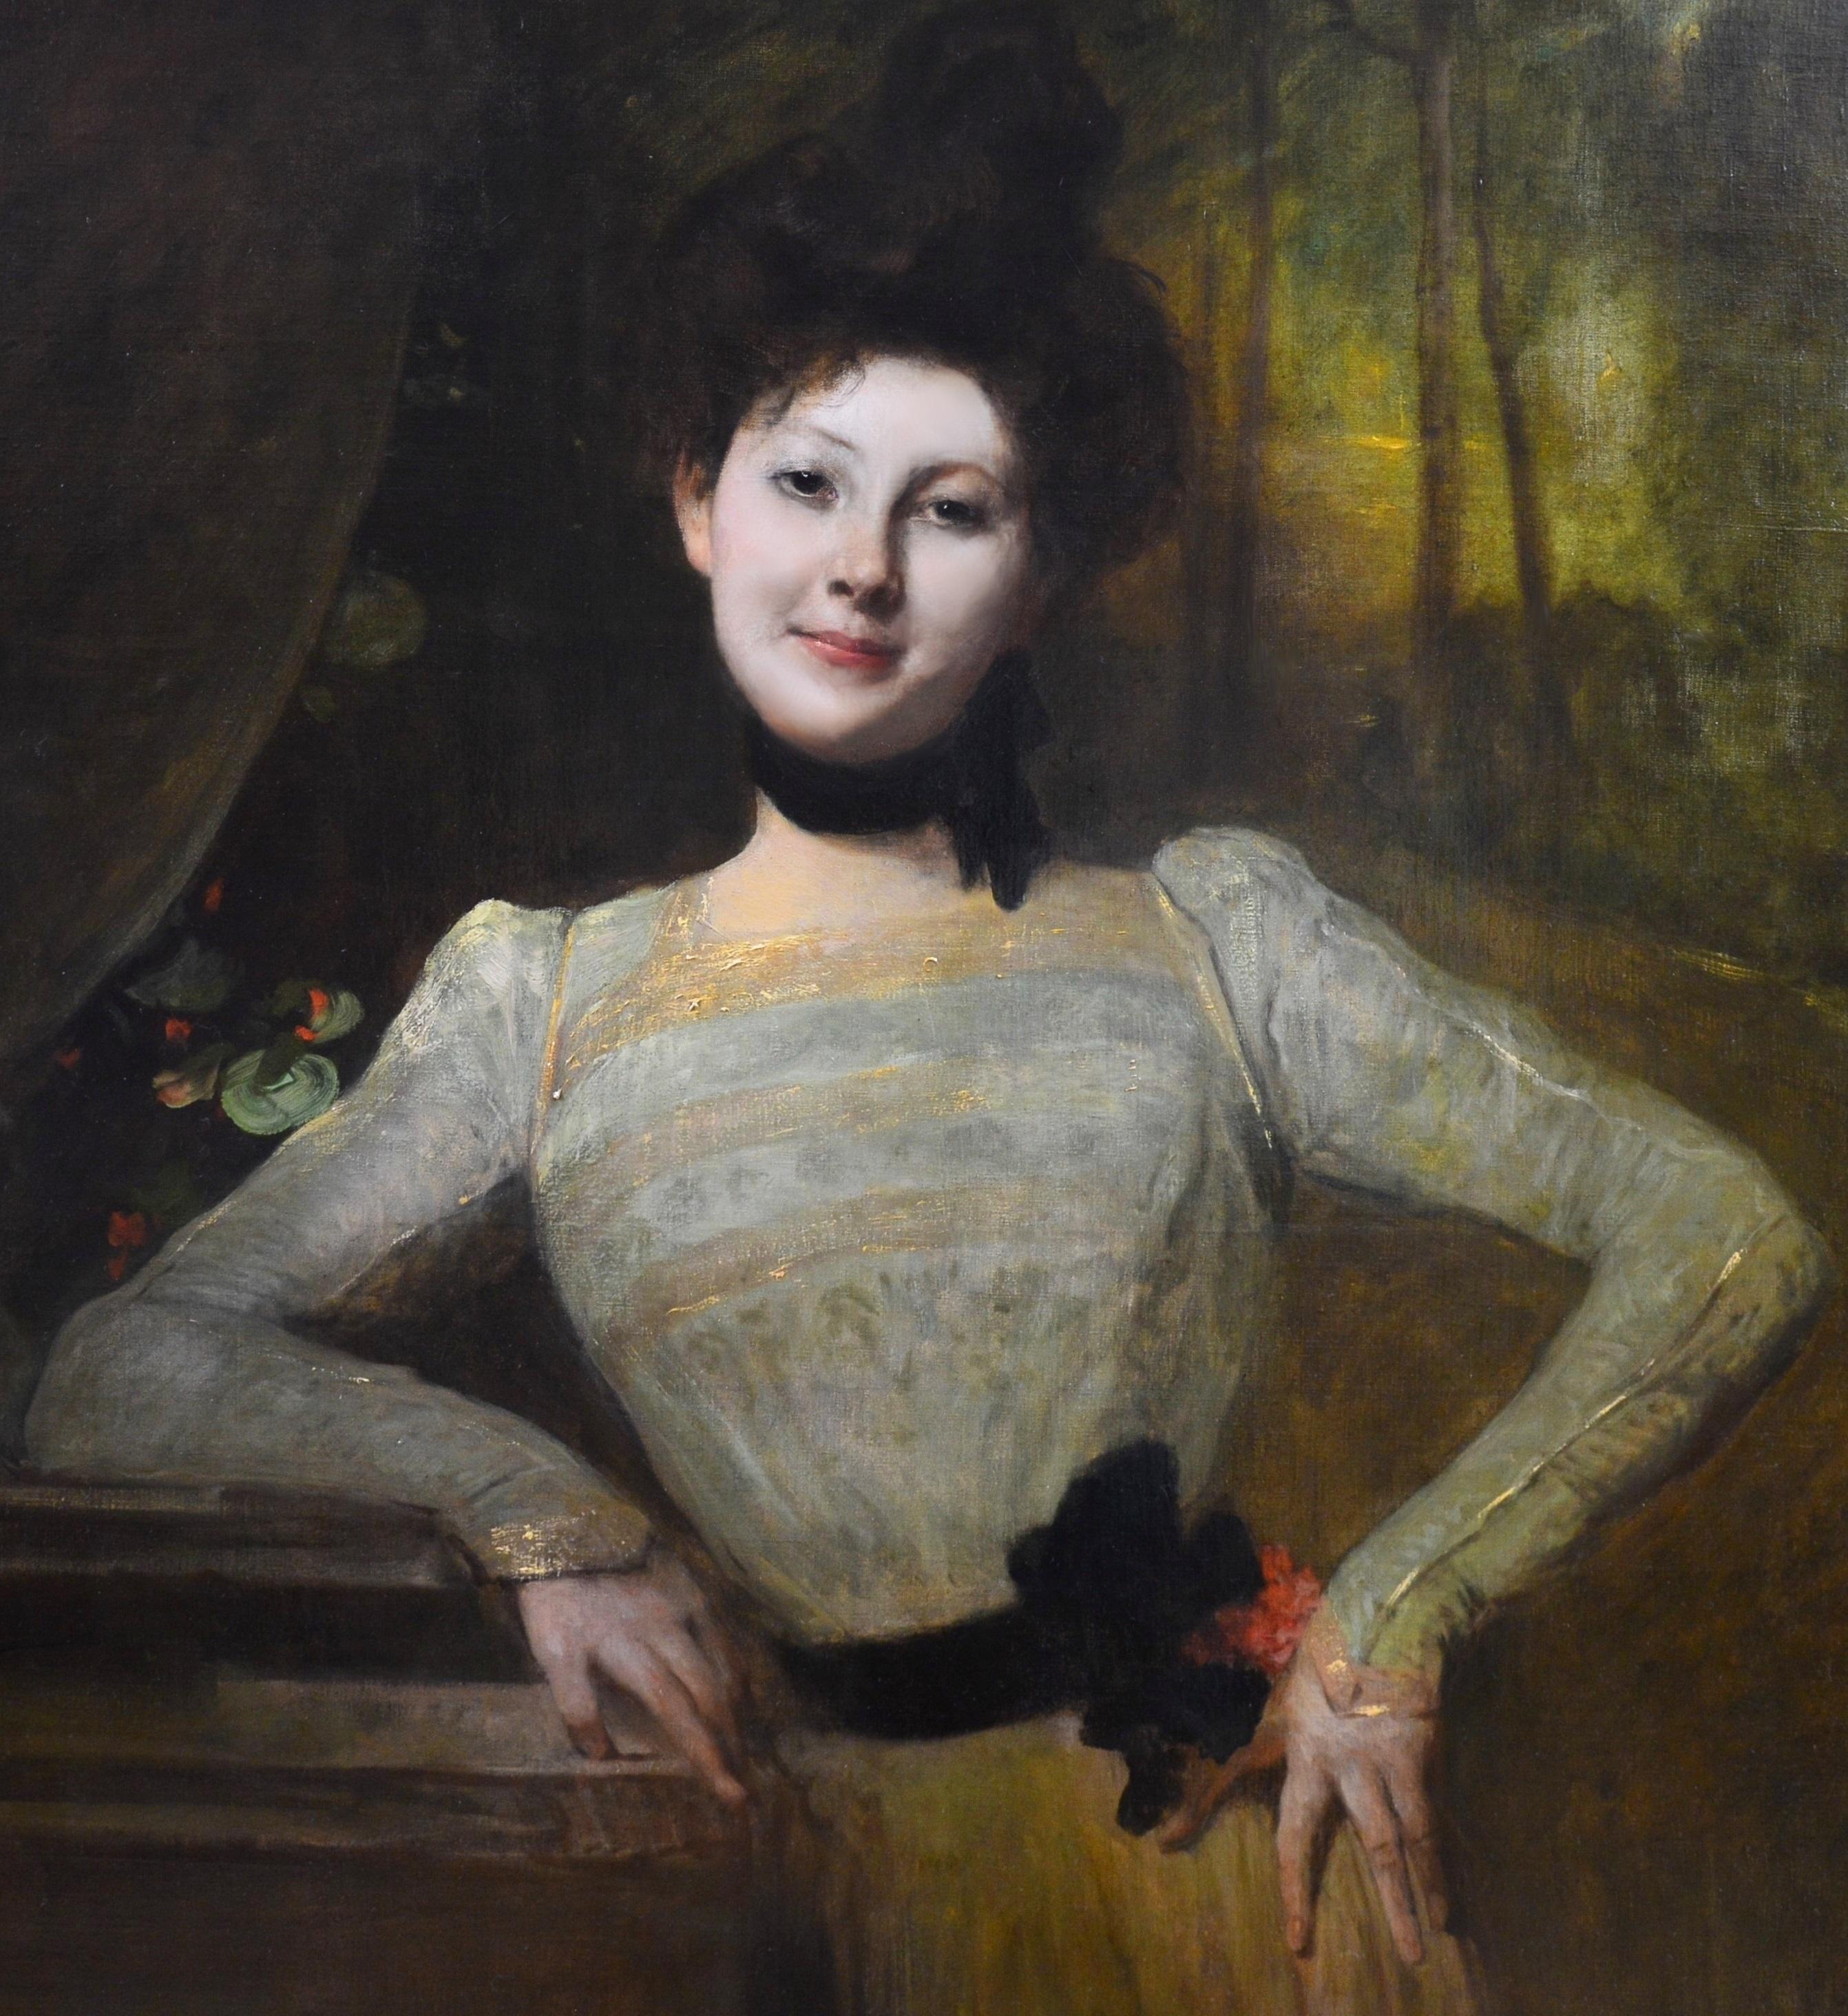 Madeleine - Very Large Portrait of Young Beauty Victorian Edwardian Girl 1901 - Academic Painting by Jean-Joseph Benjamin-Constant